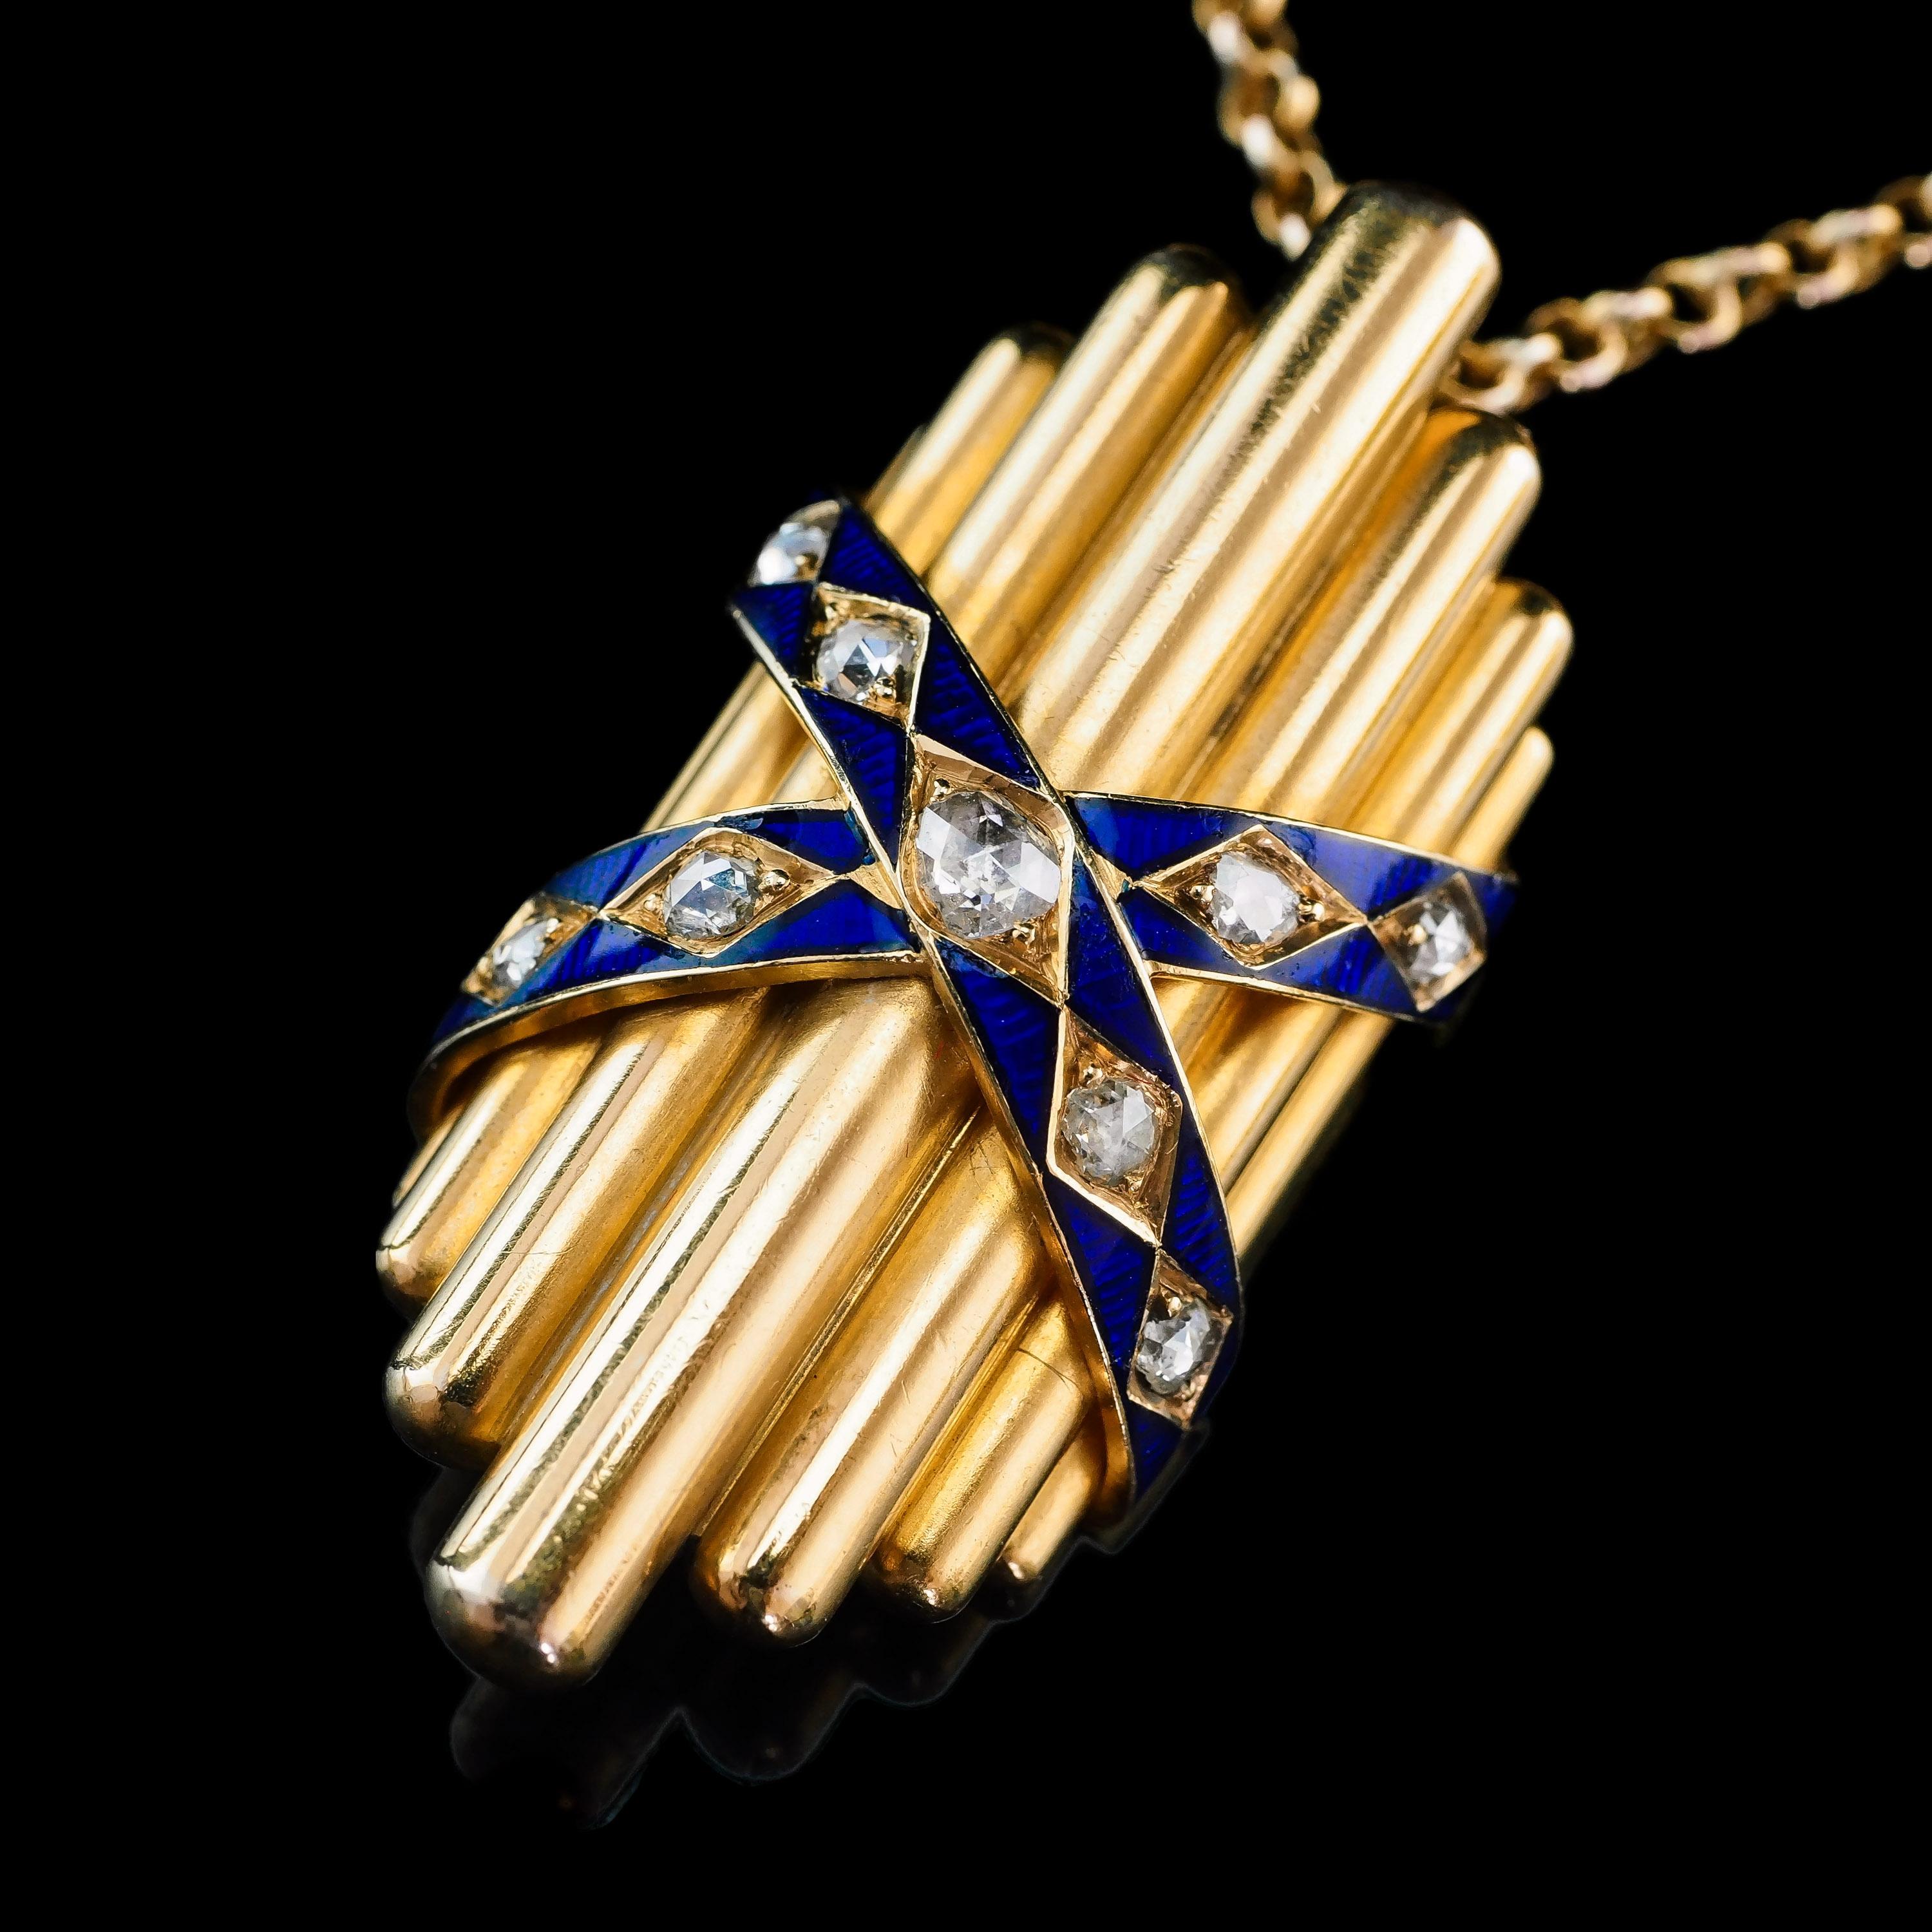 We are delighted to offer this stylish Victorian 18K gold antique pendant. (Please note, this listing is for the pendant only and does not include the antique belcher chain. We will, however, include a contemporary 9ct solid gold lace so it is ready